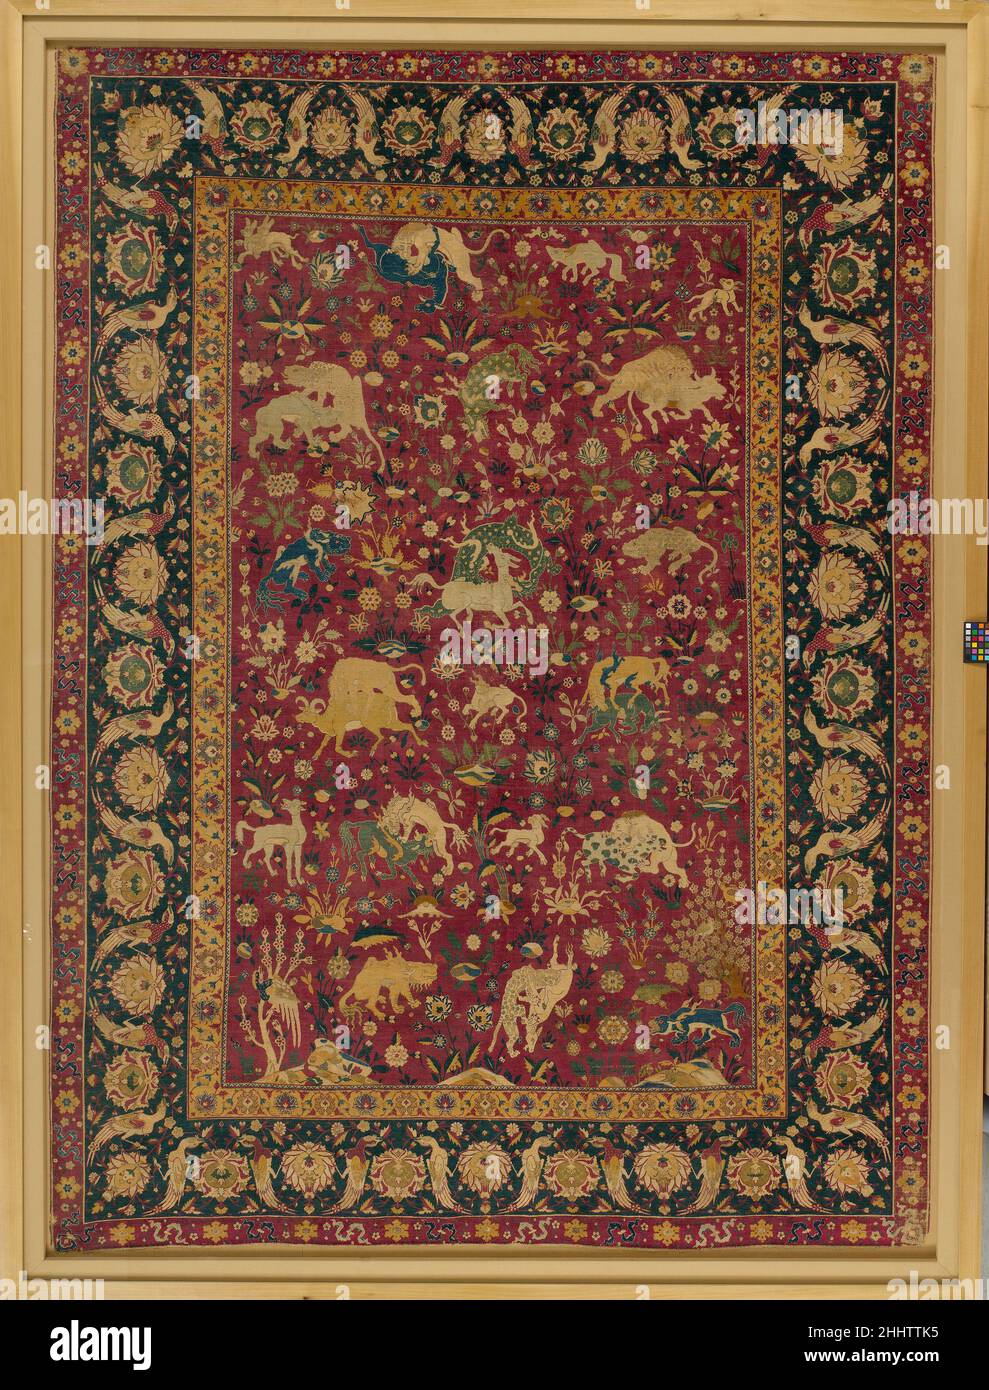 Silk Animal Carpet second half 16th century This is one of a small group of carpets woven entirely of silk with approximately 800 knots per square inch, representing the highest level of production in sixteenth?century Iran. In contrast to the other floral and geometric carpets in this group, this outstanding example displays a painterly approach, with images of animals in combat against a background of flowering plants. The range of animals includes lions, tigers, and rams, as well as spotted dragons and horned, deerlike beasts borrowed from Chinese art. Similar imagery appears on manuscript Stock Photo